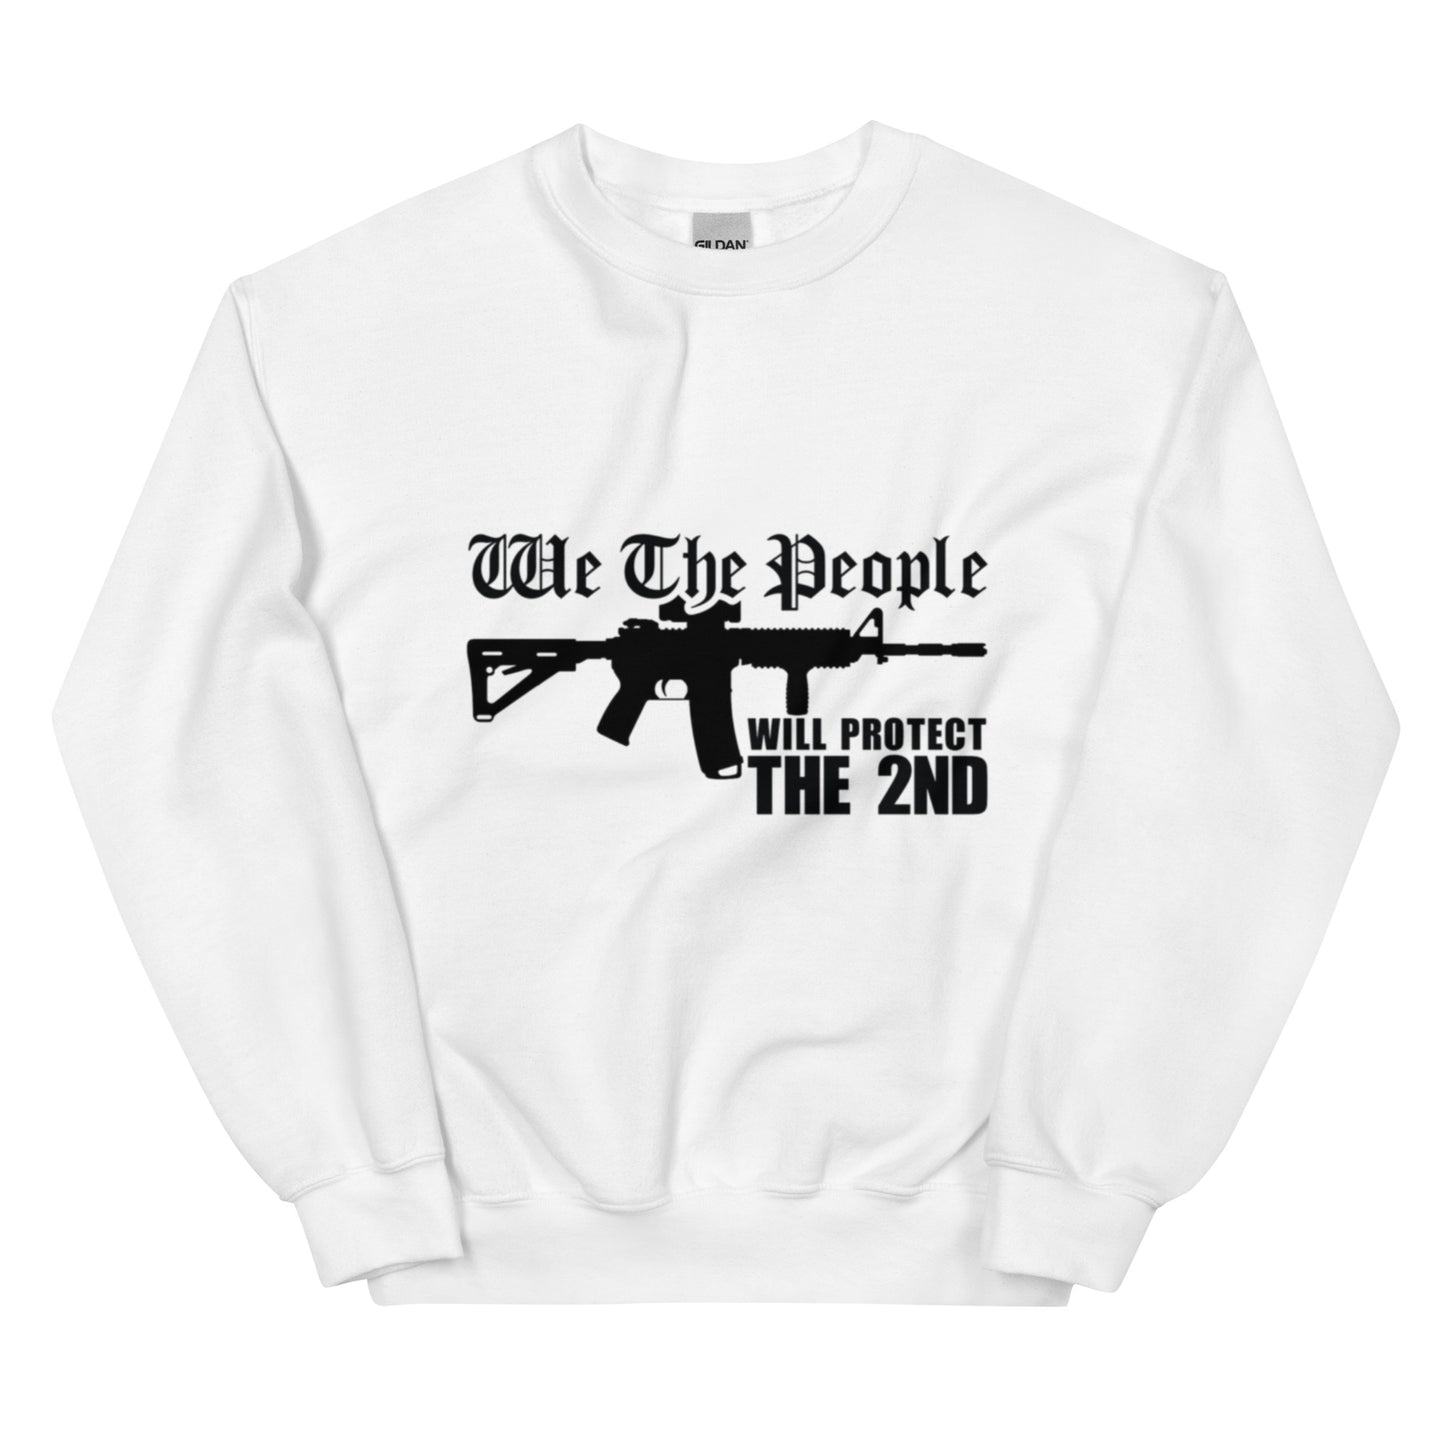 We the People will Protect the 2nd Unisex Crew Neck Sweatshirt